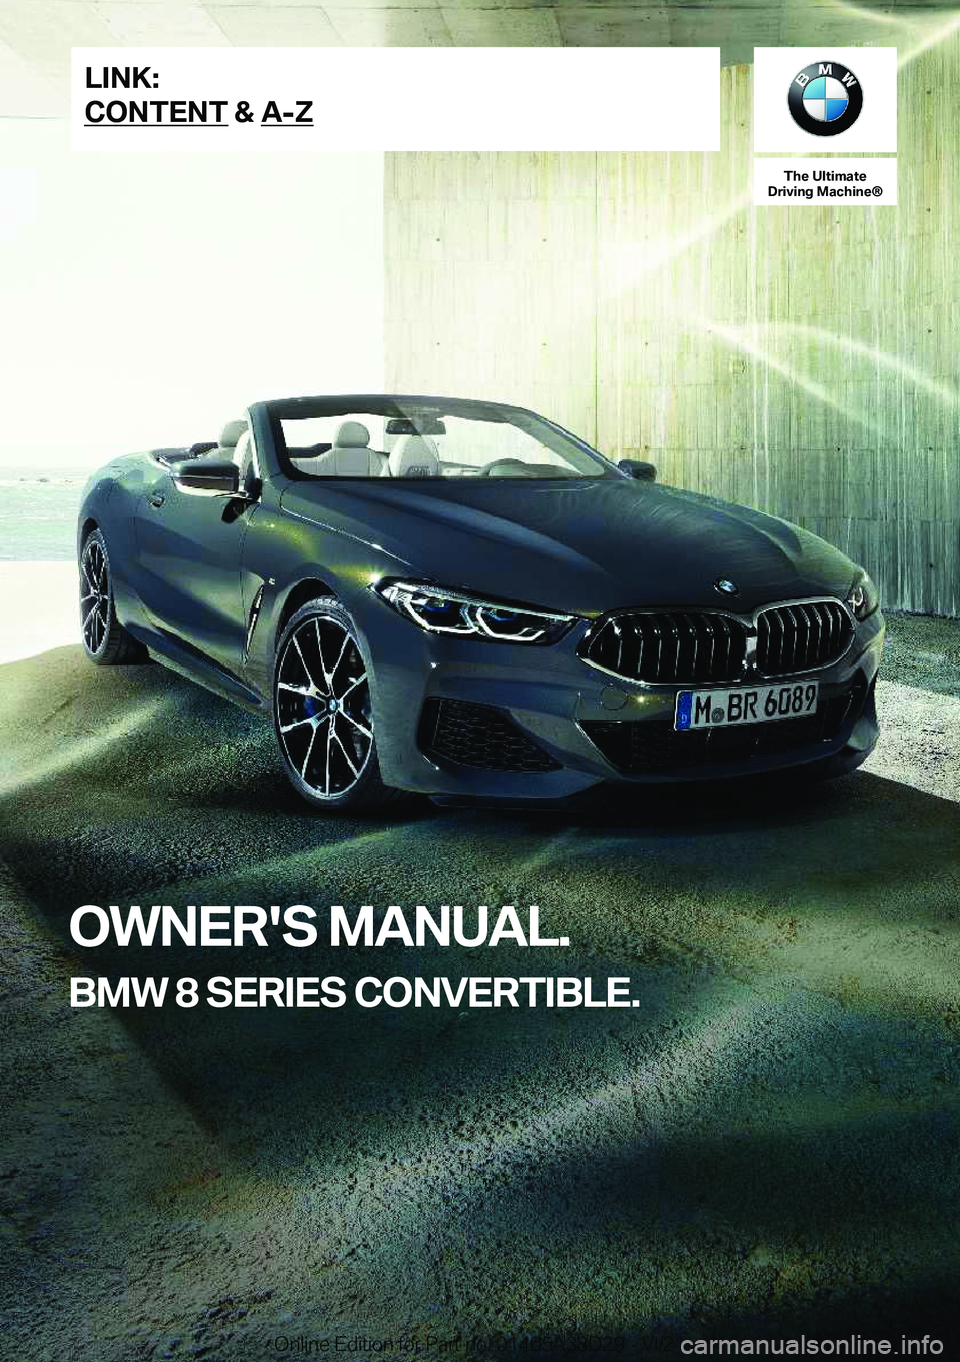 BMW 8 SERIES CONVERTIBLE 2022  Owners Manual �T�h�e��U�l�t�i�m�a�t�e
�D�r�i�v�i�n�g��M�a�c�h�i�n�e�n
�O�W�N�E�R�'�S��M�A�N�U�A�L�.
�B�M�W��8��S�E�R�I�E�S��C�O�N�V�E�R�T�I�B�L�E�.�L�I�N�K�:
�C�O�N�T�E�N�T��&��A�-�Z�O�n�l�i�n�e��E�d�i